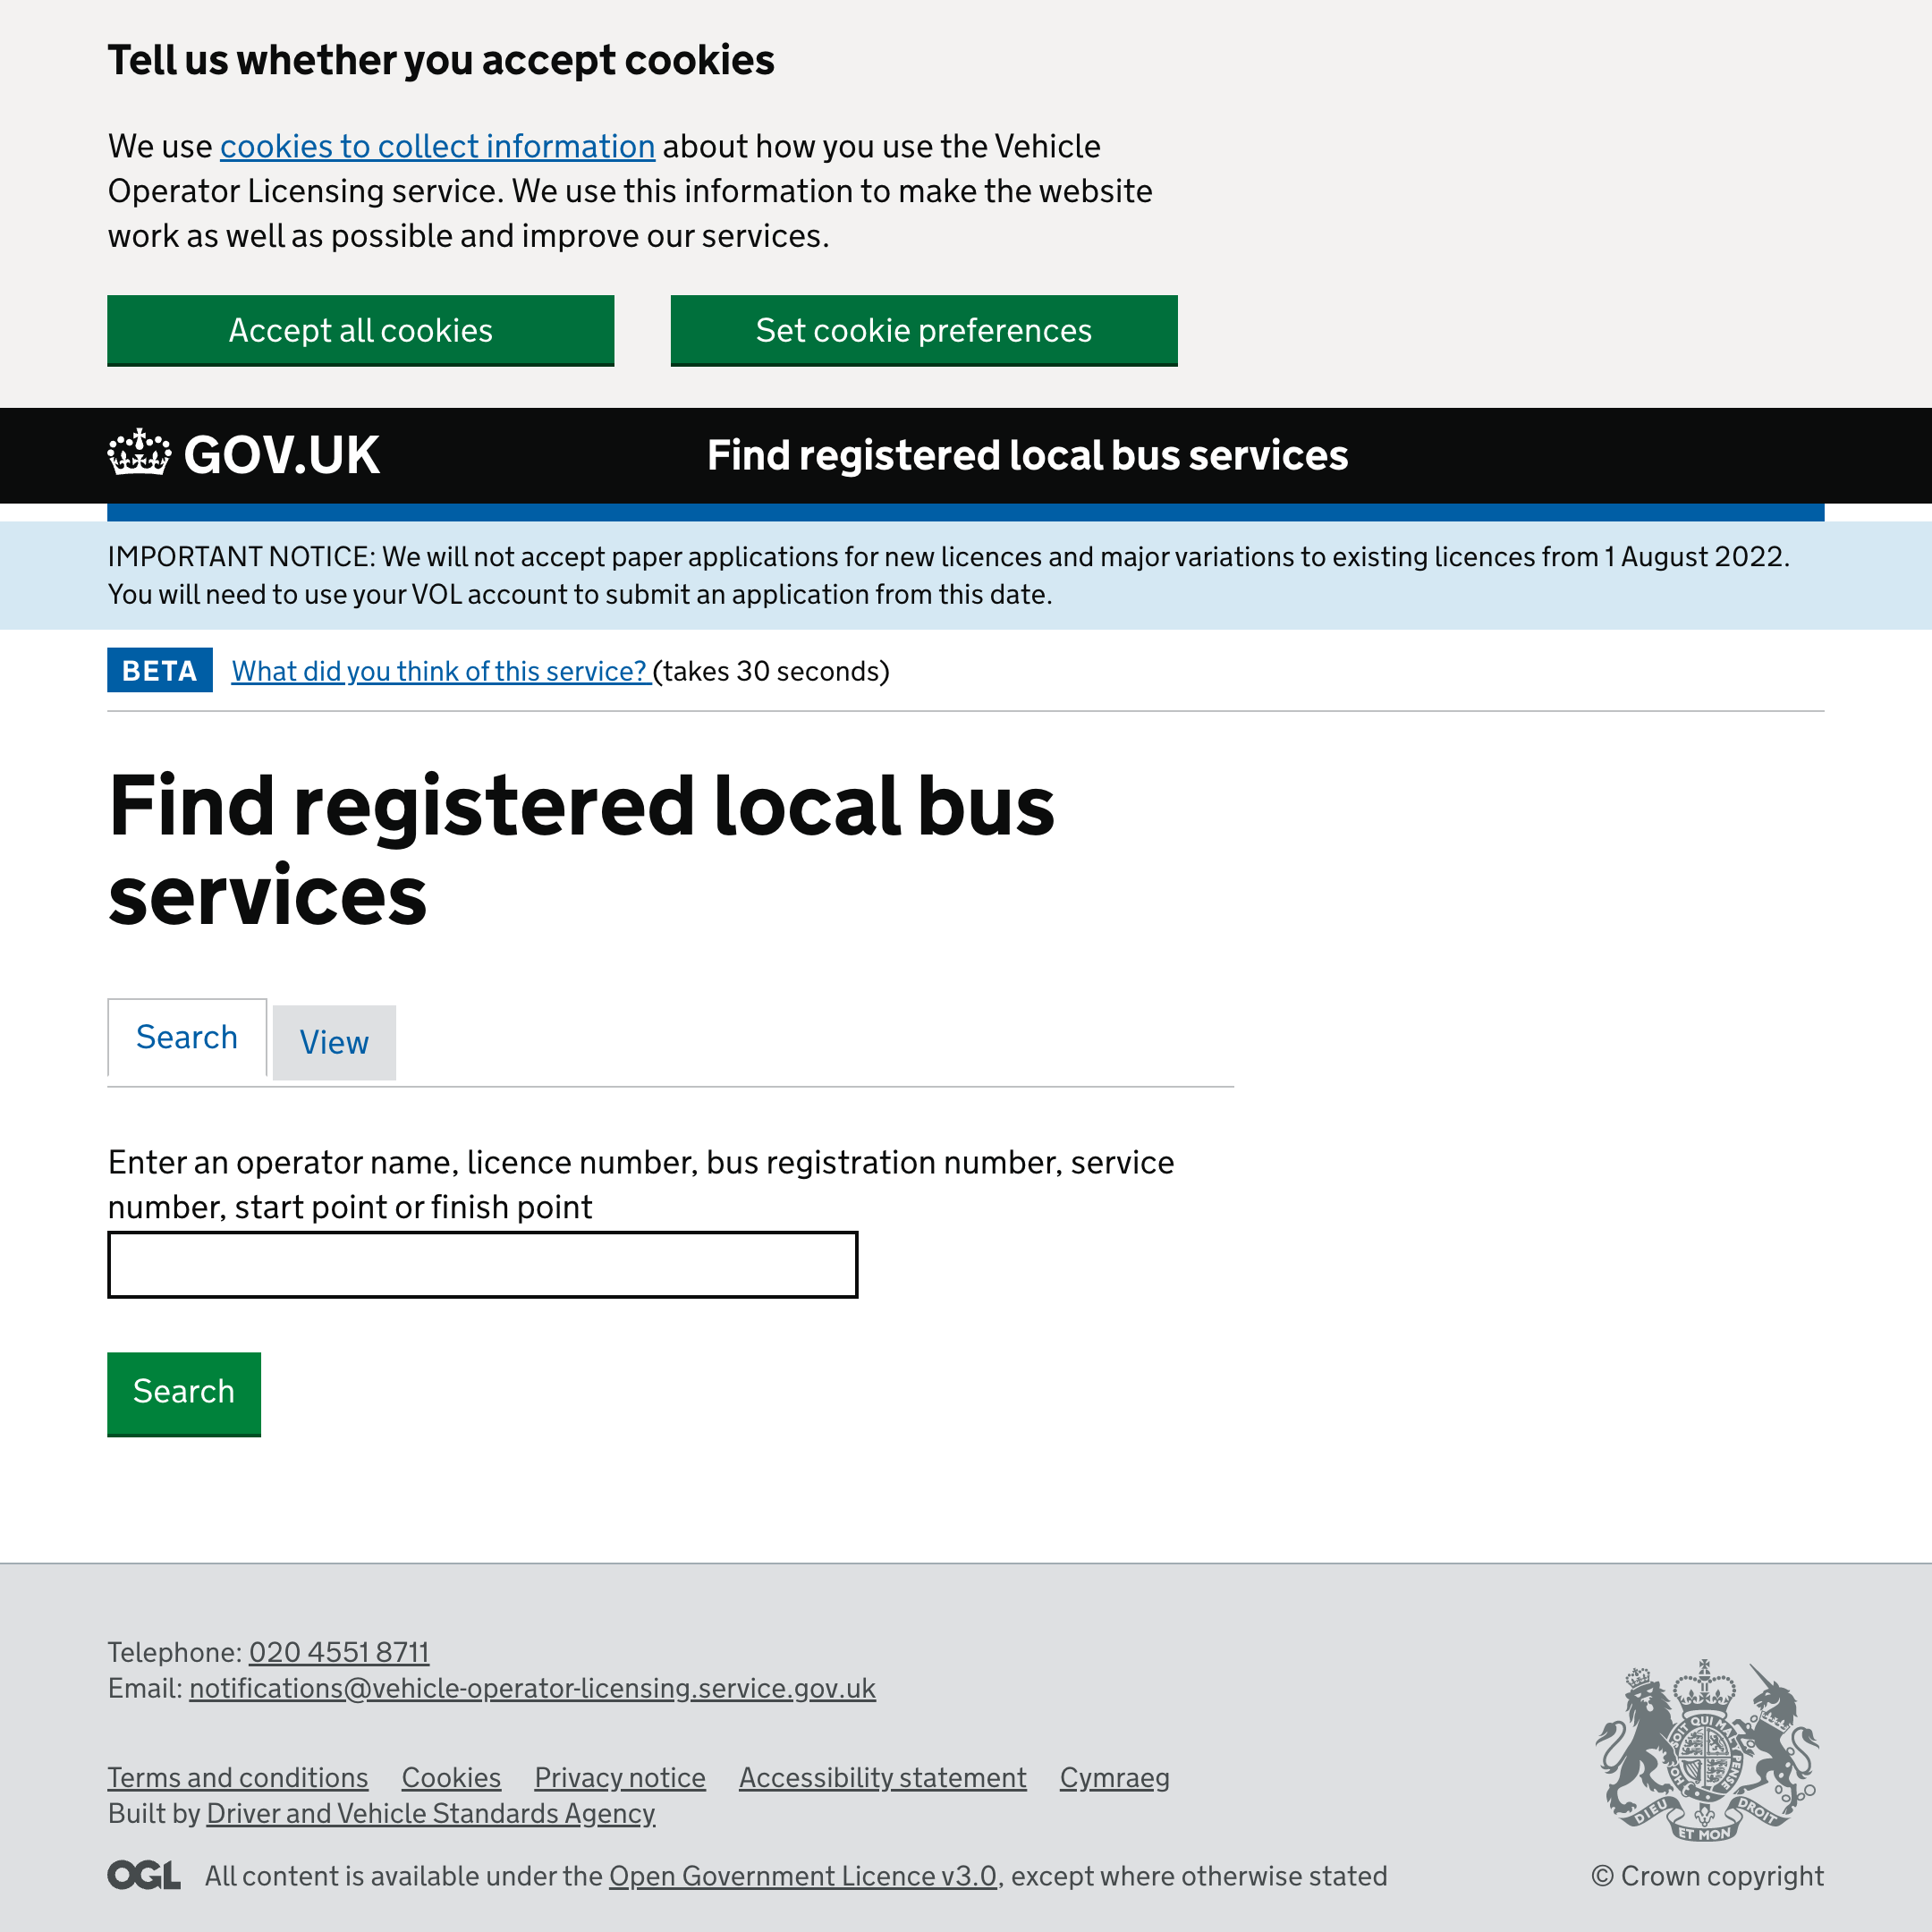 Find registered local bus services